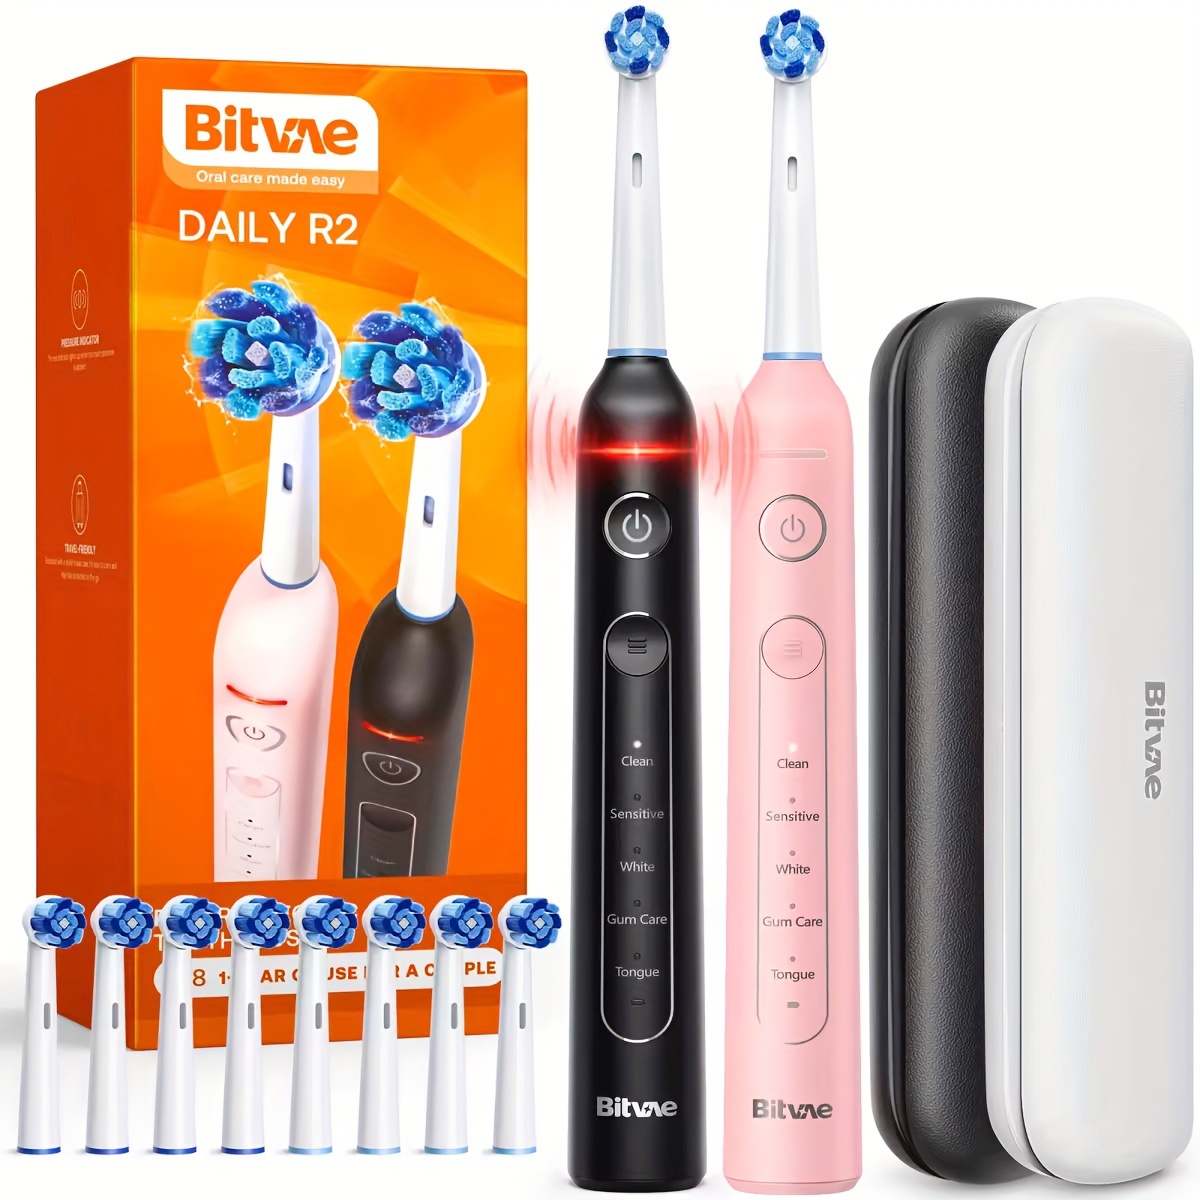 

Bitvae Rotating Electric Toothbrush 2 Packs For Adults With Pressure Sensor, Gifts For Men/women, 5 Modes Rechargeable Power Toothbrush With 8 Brush Heads, Black & Pink, R2